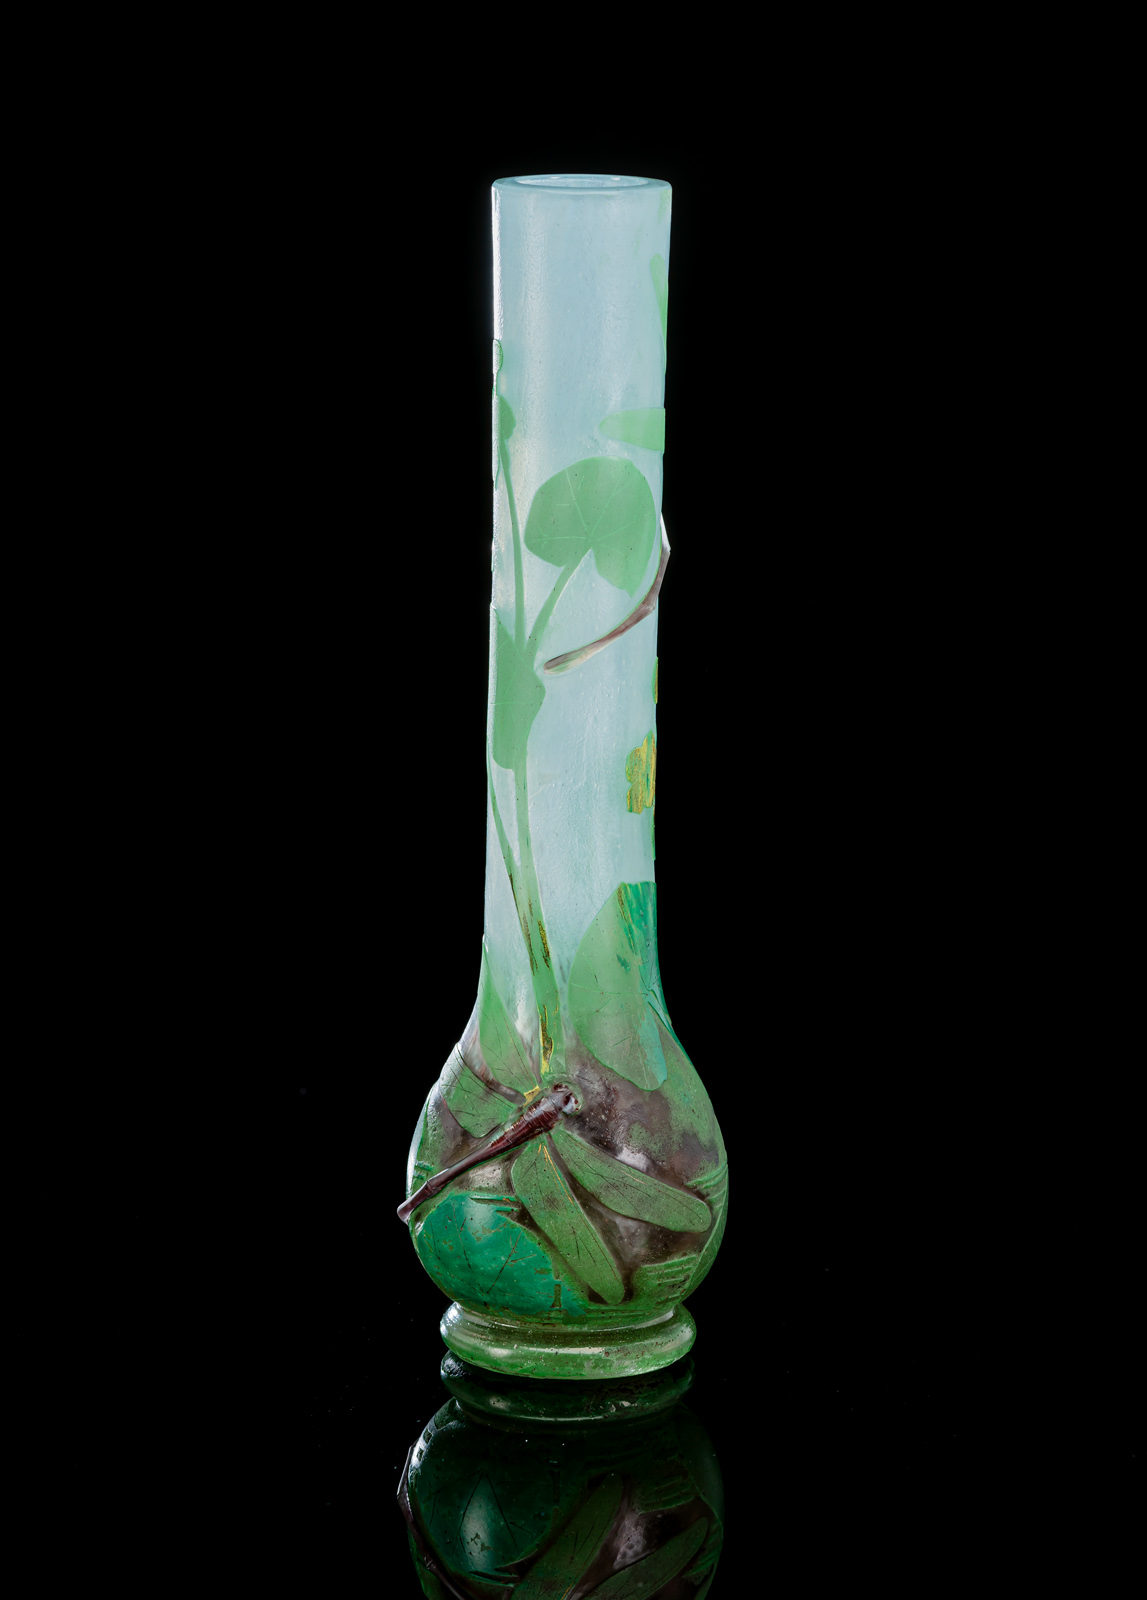 Colourless, clear blue, green and manganese mottled glass with green overlay and acid-etched decor of swamp plants, two applied glass dragonflies. Signed at the bottom 